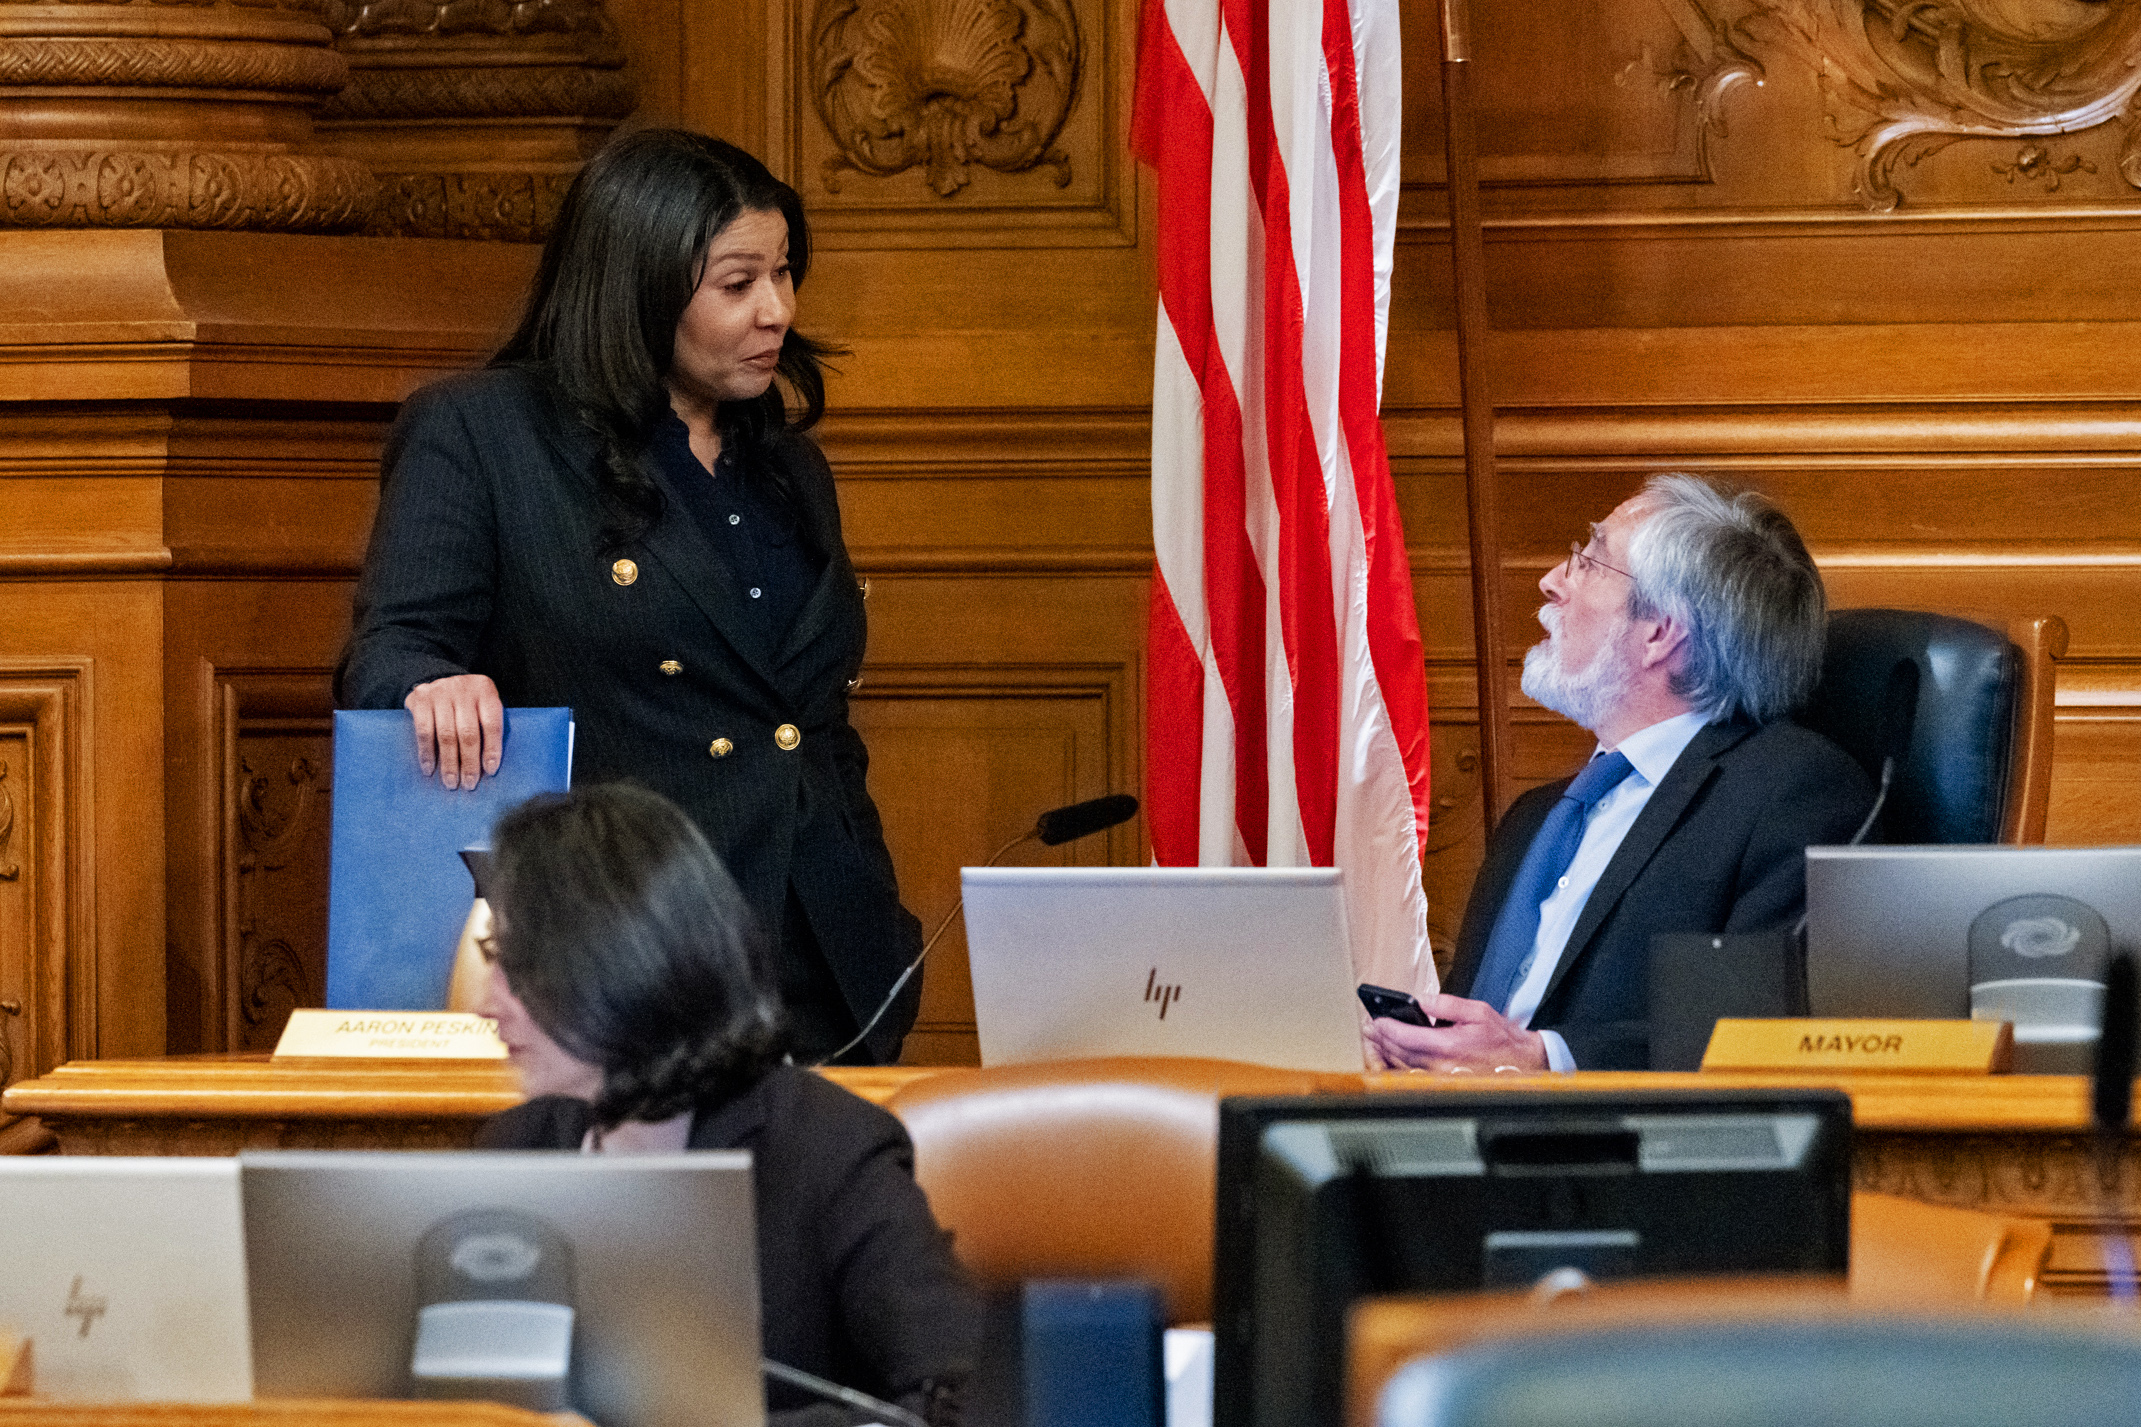 Mayor London Breed, left, and Board of Supervisors President Aaron Peskin chat before a board meeting at San Francisco City Hall on March 7, 2023.